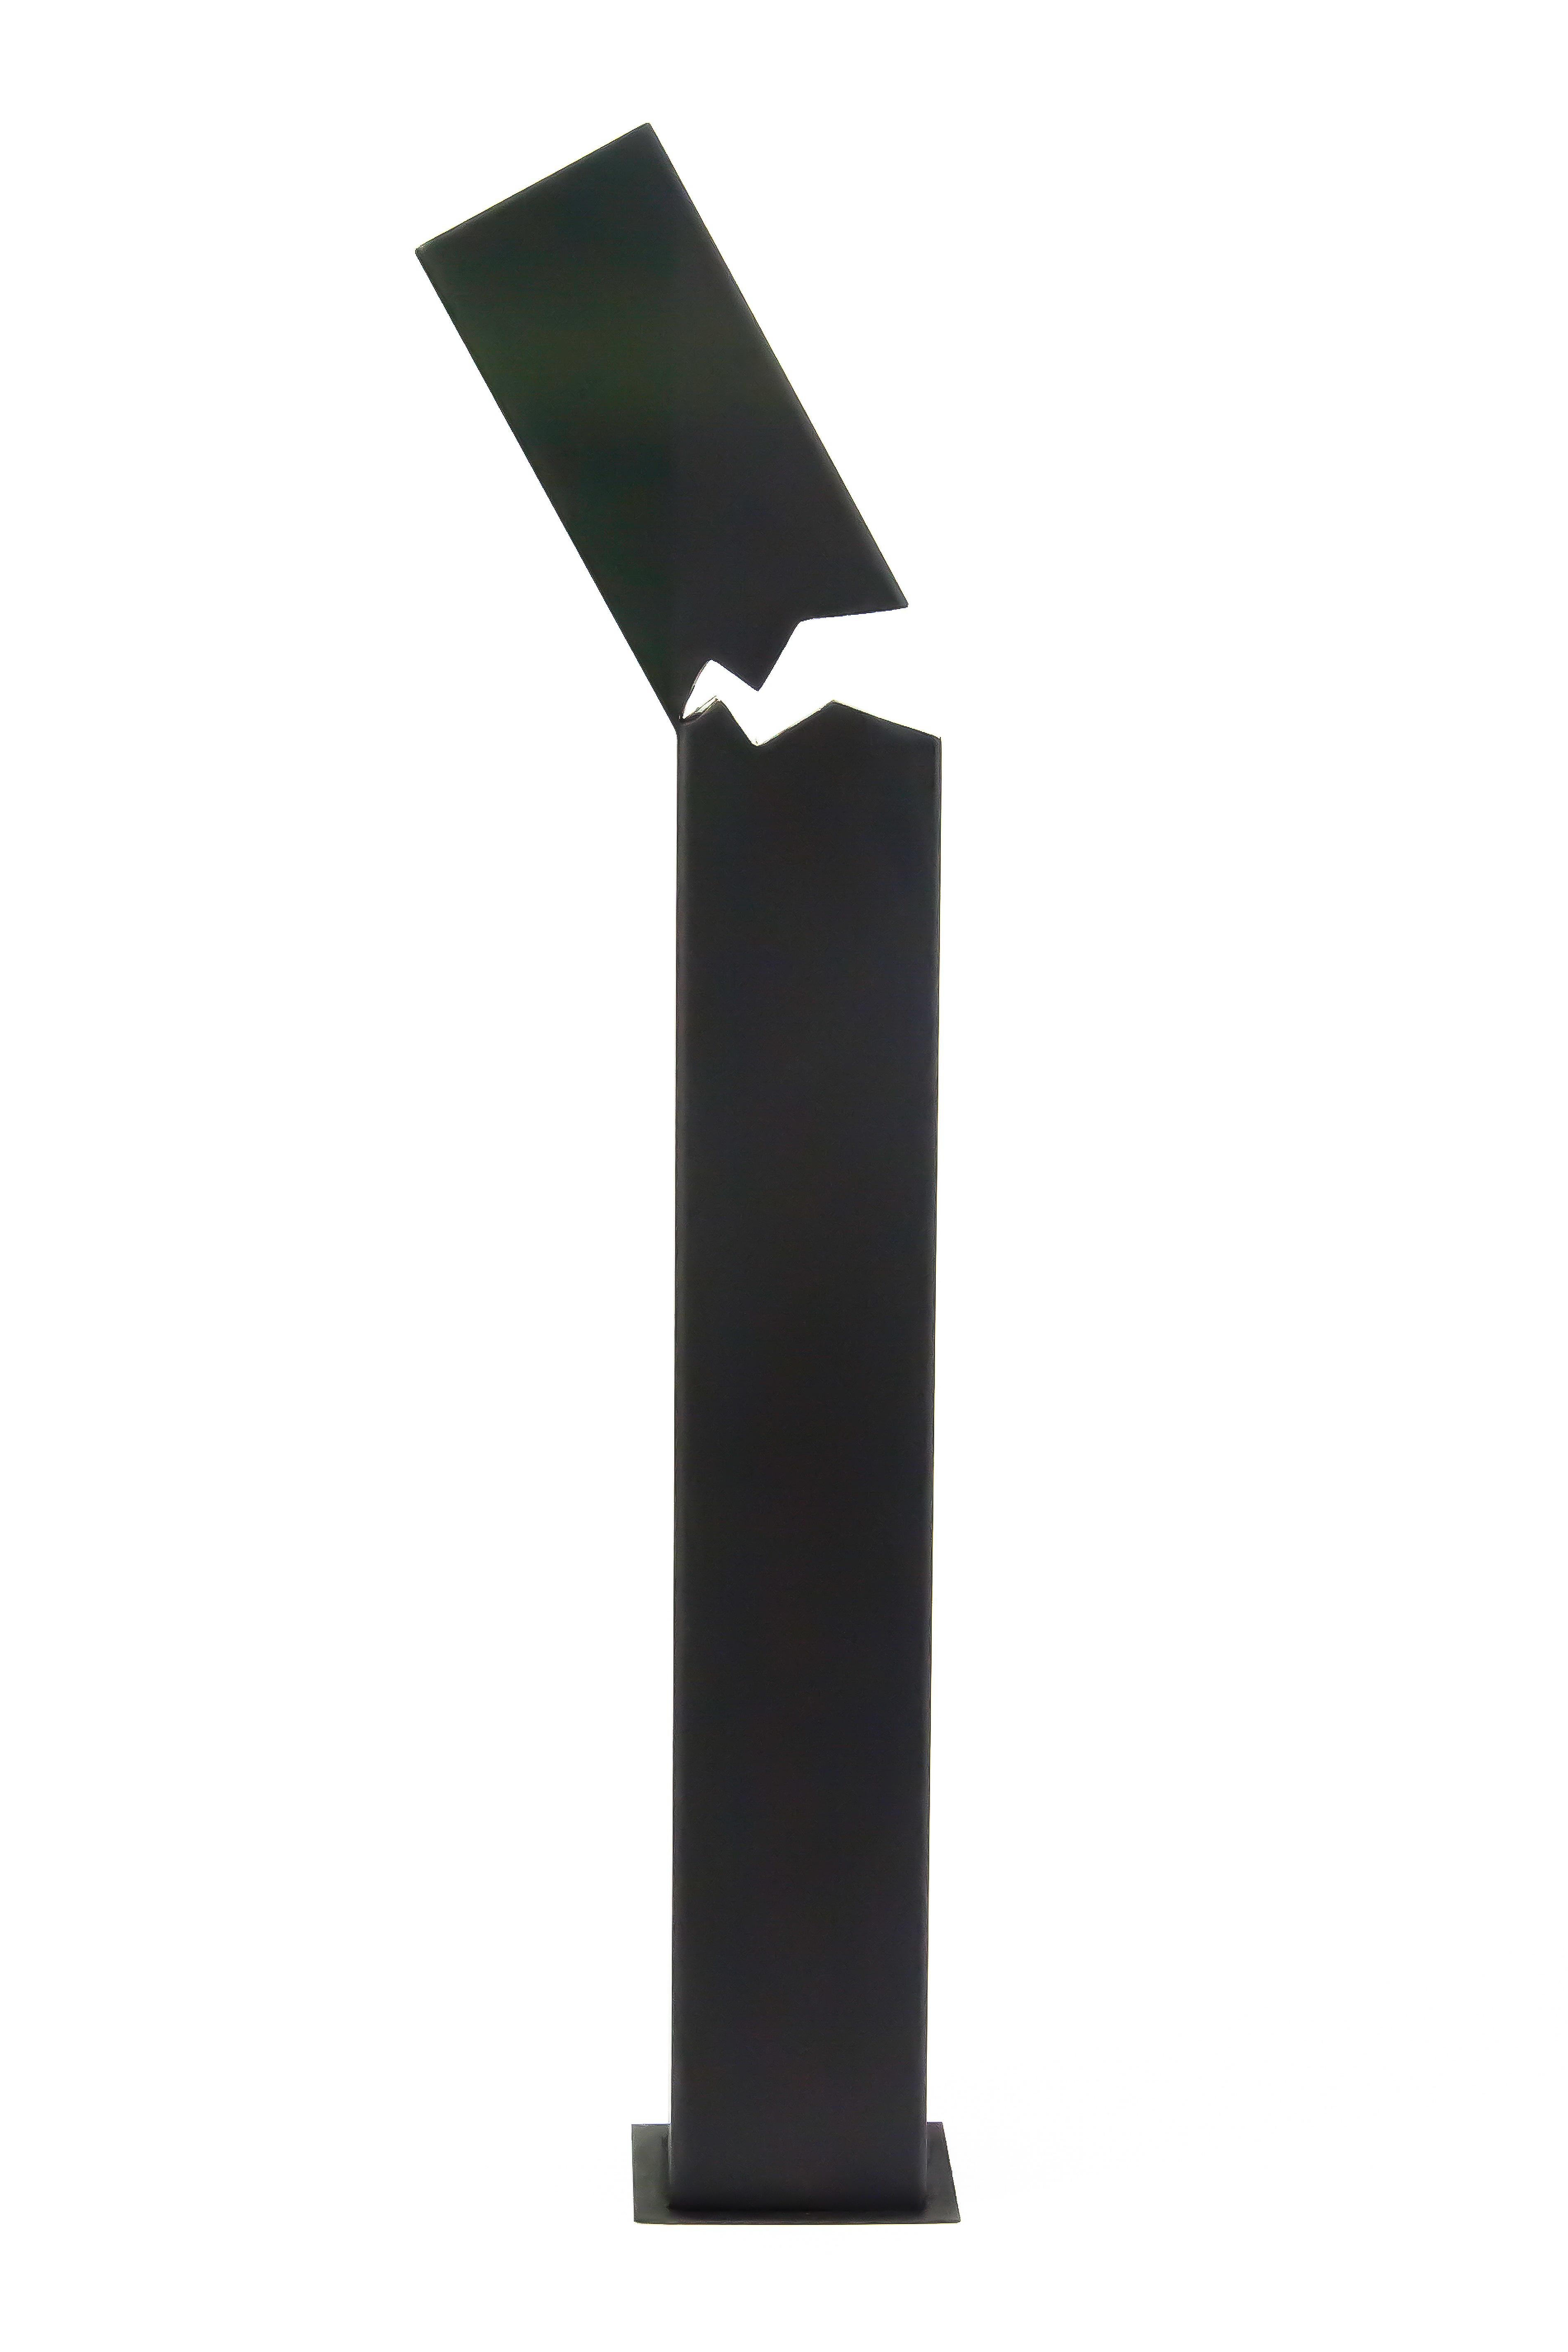 Athabasca Black 2/10- tall, modern, geometric, contemporary, steel sculpture For Sale 6